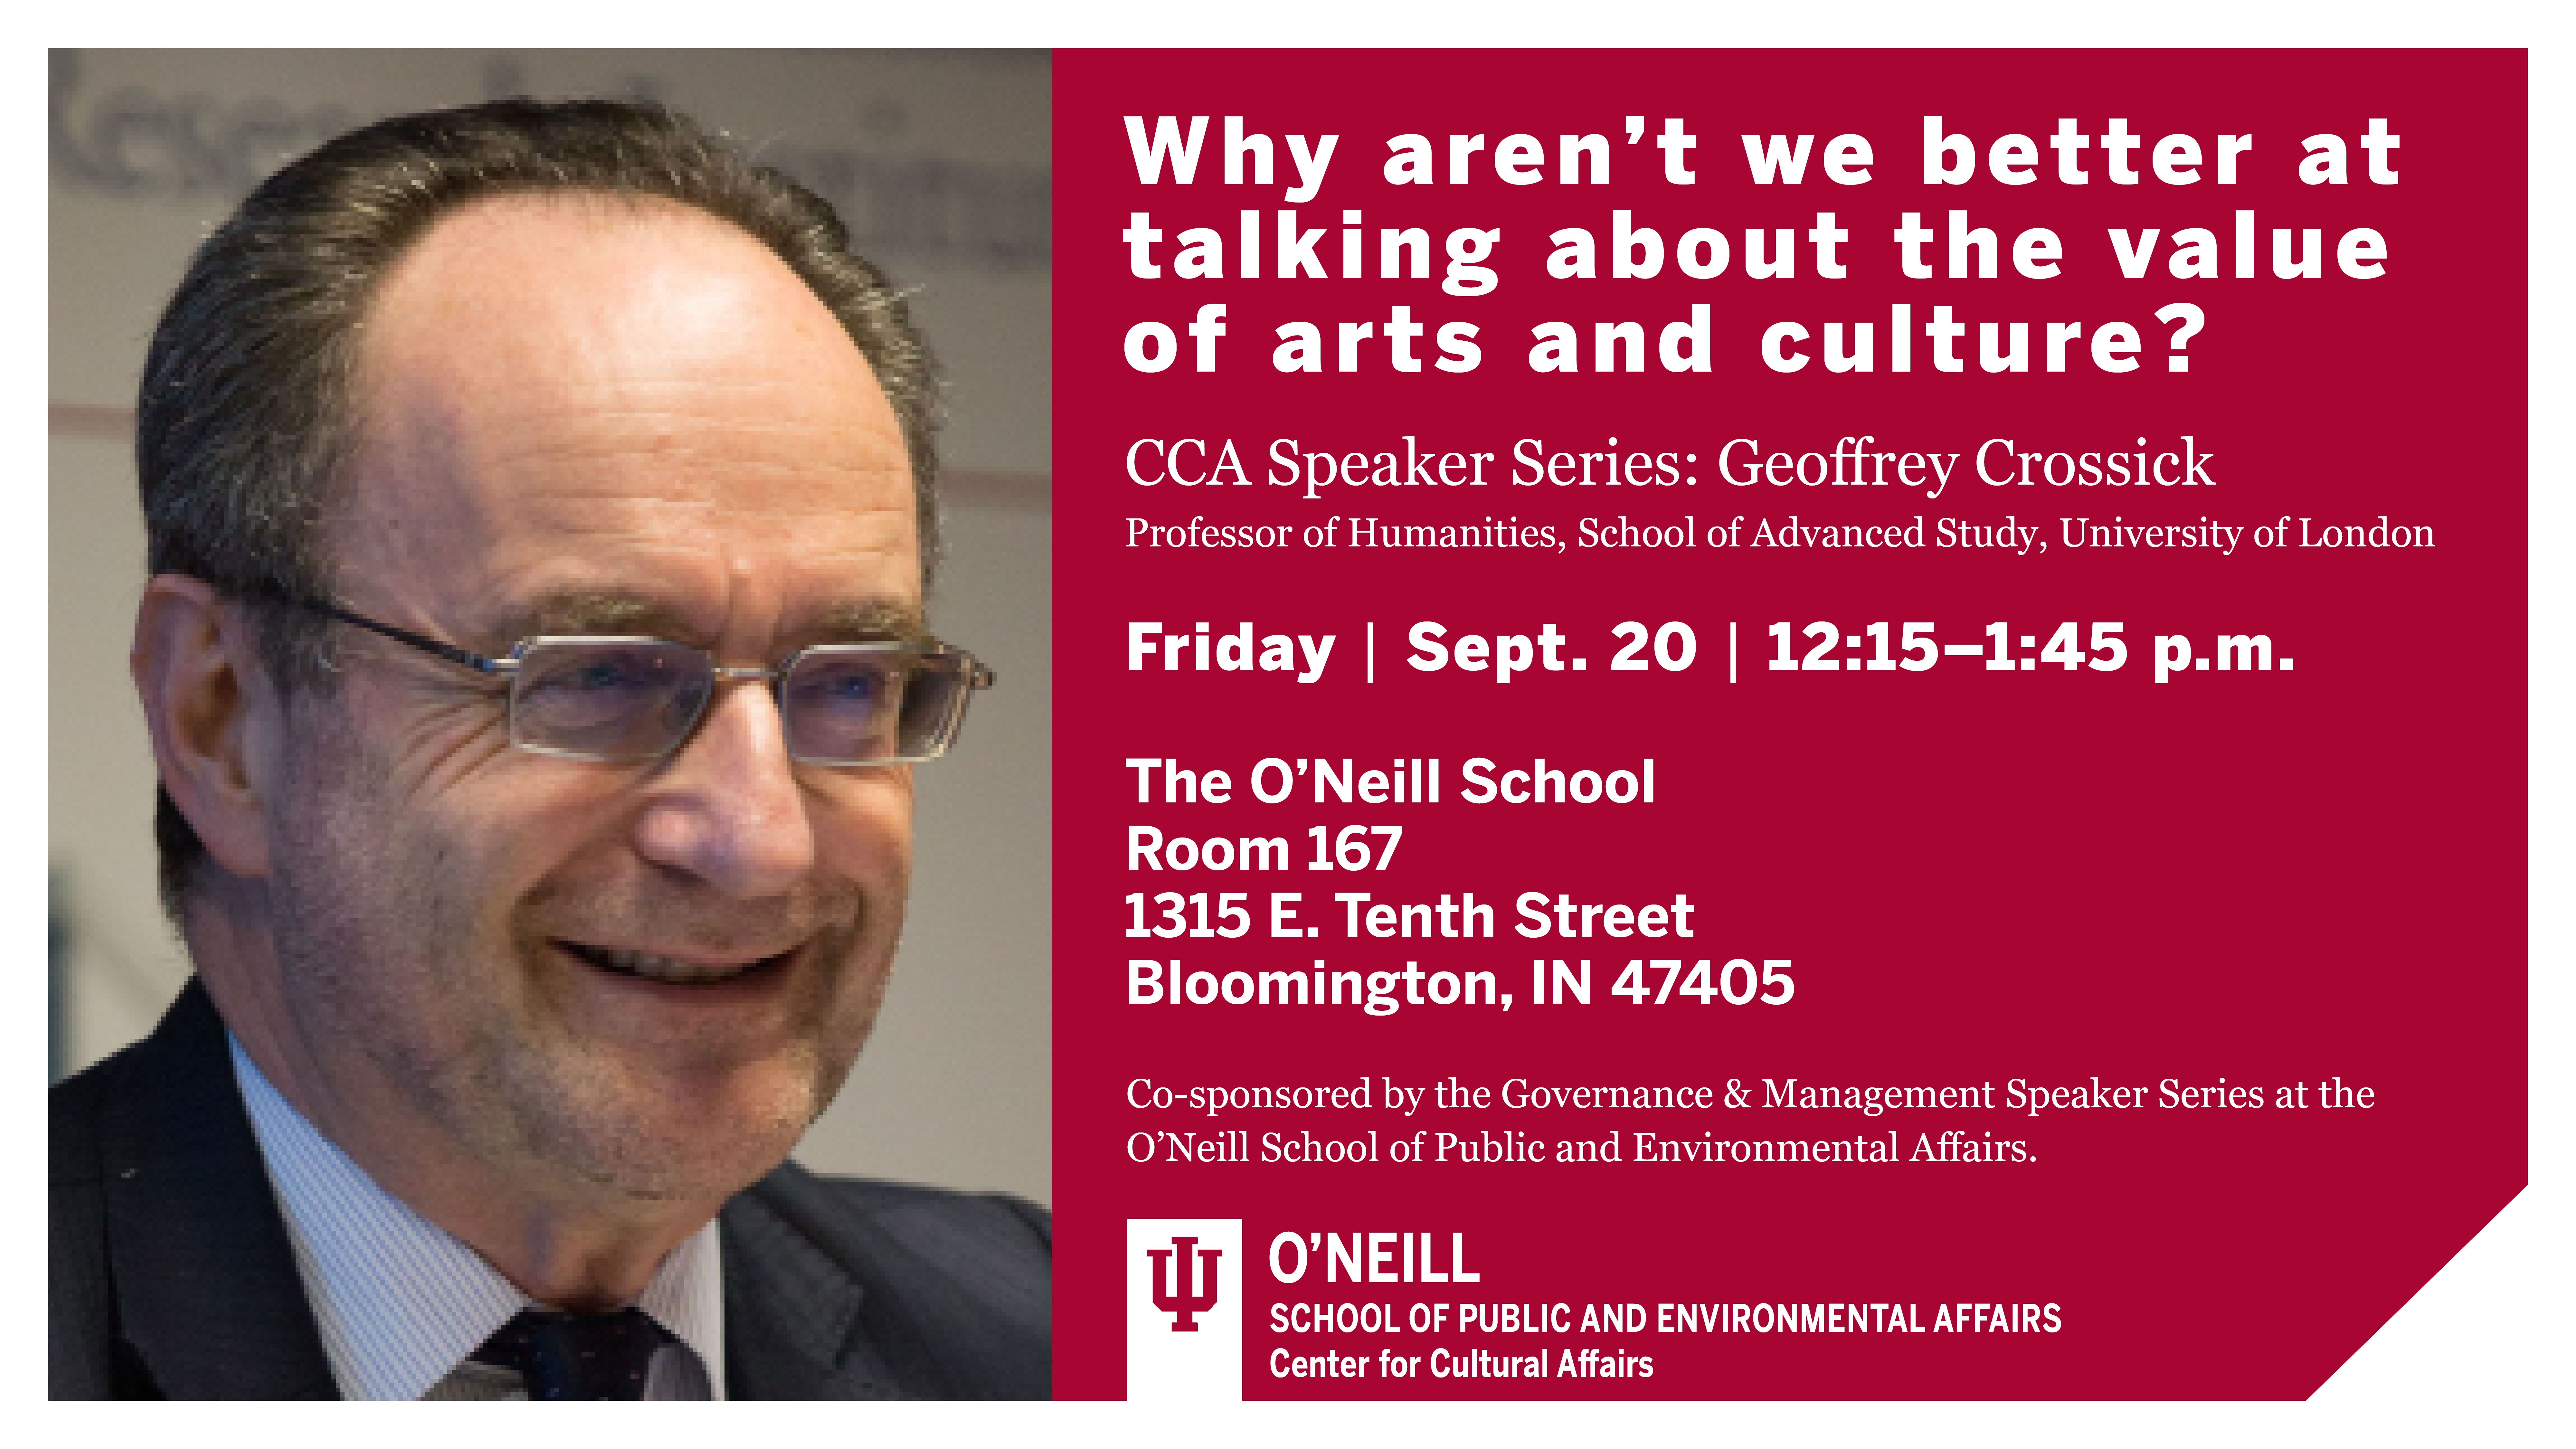 Why aren't we better at talking about the value of arts and culture?  CCA Speaker Series: Geoffrey Crossick  Professor of Humanities, School of Advanced Study, University of London  Friday  •  Sept 20  •  12:15-1:45 p.m.  The O'Neill School  Room A221  1315 E Tenth Street  Bloomington, IN 47401  Co-sponsored by the Governance & Management Speaker Series at the O'Neill School of Public and Environmental Affairs.